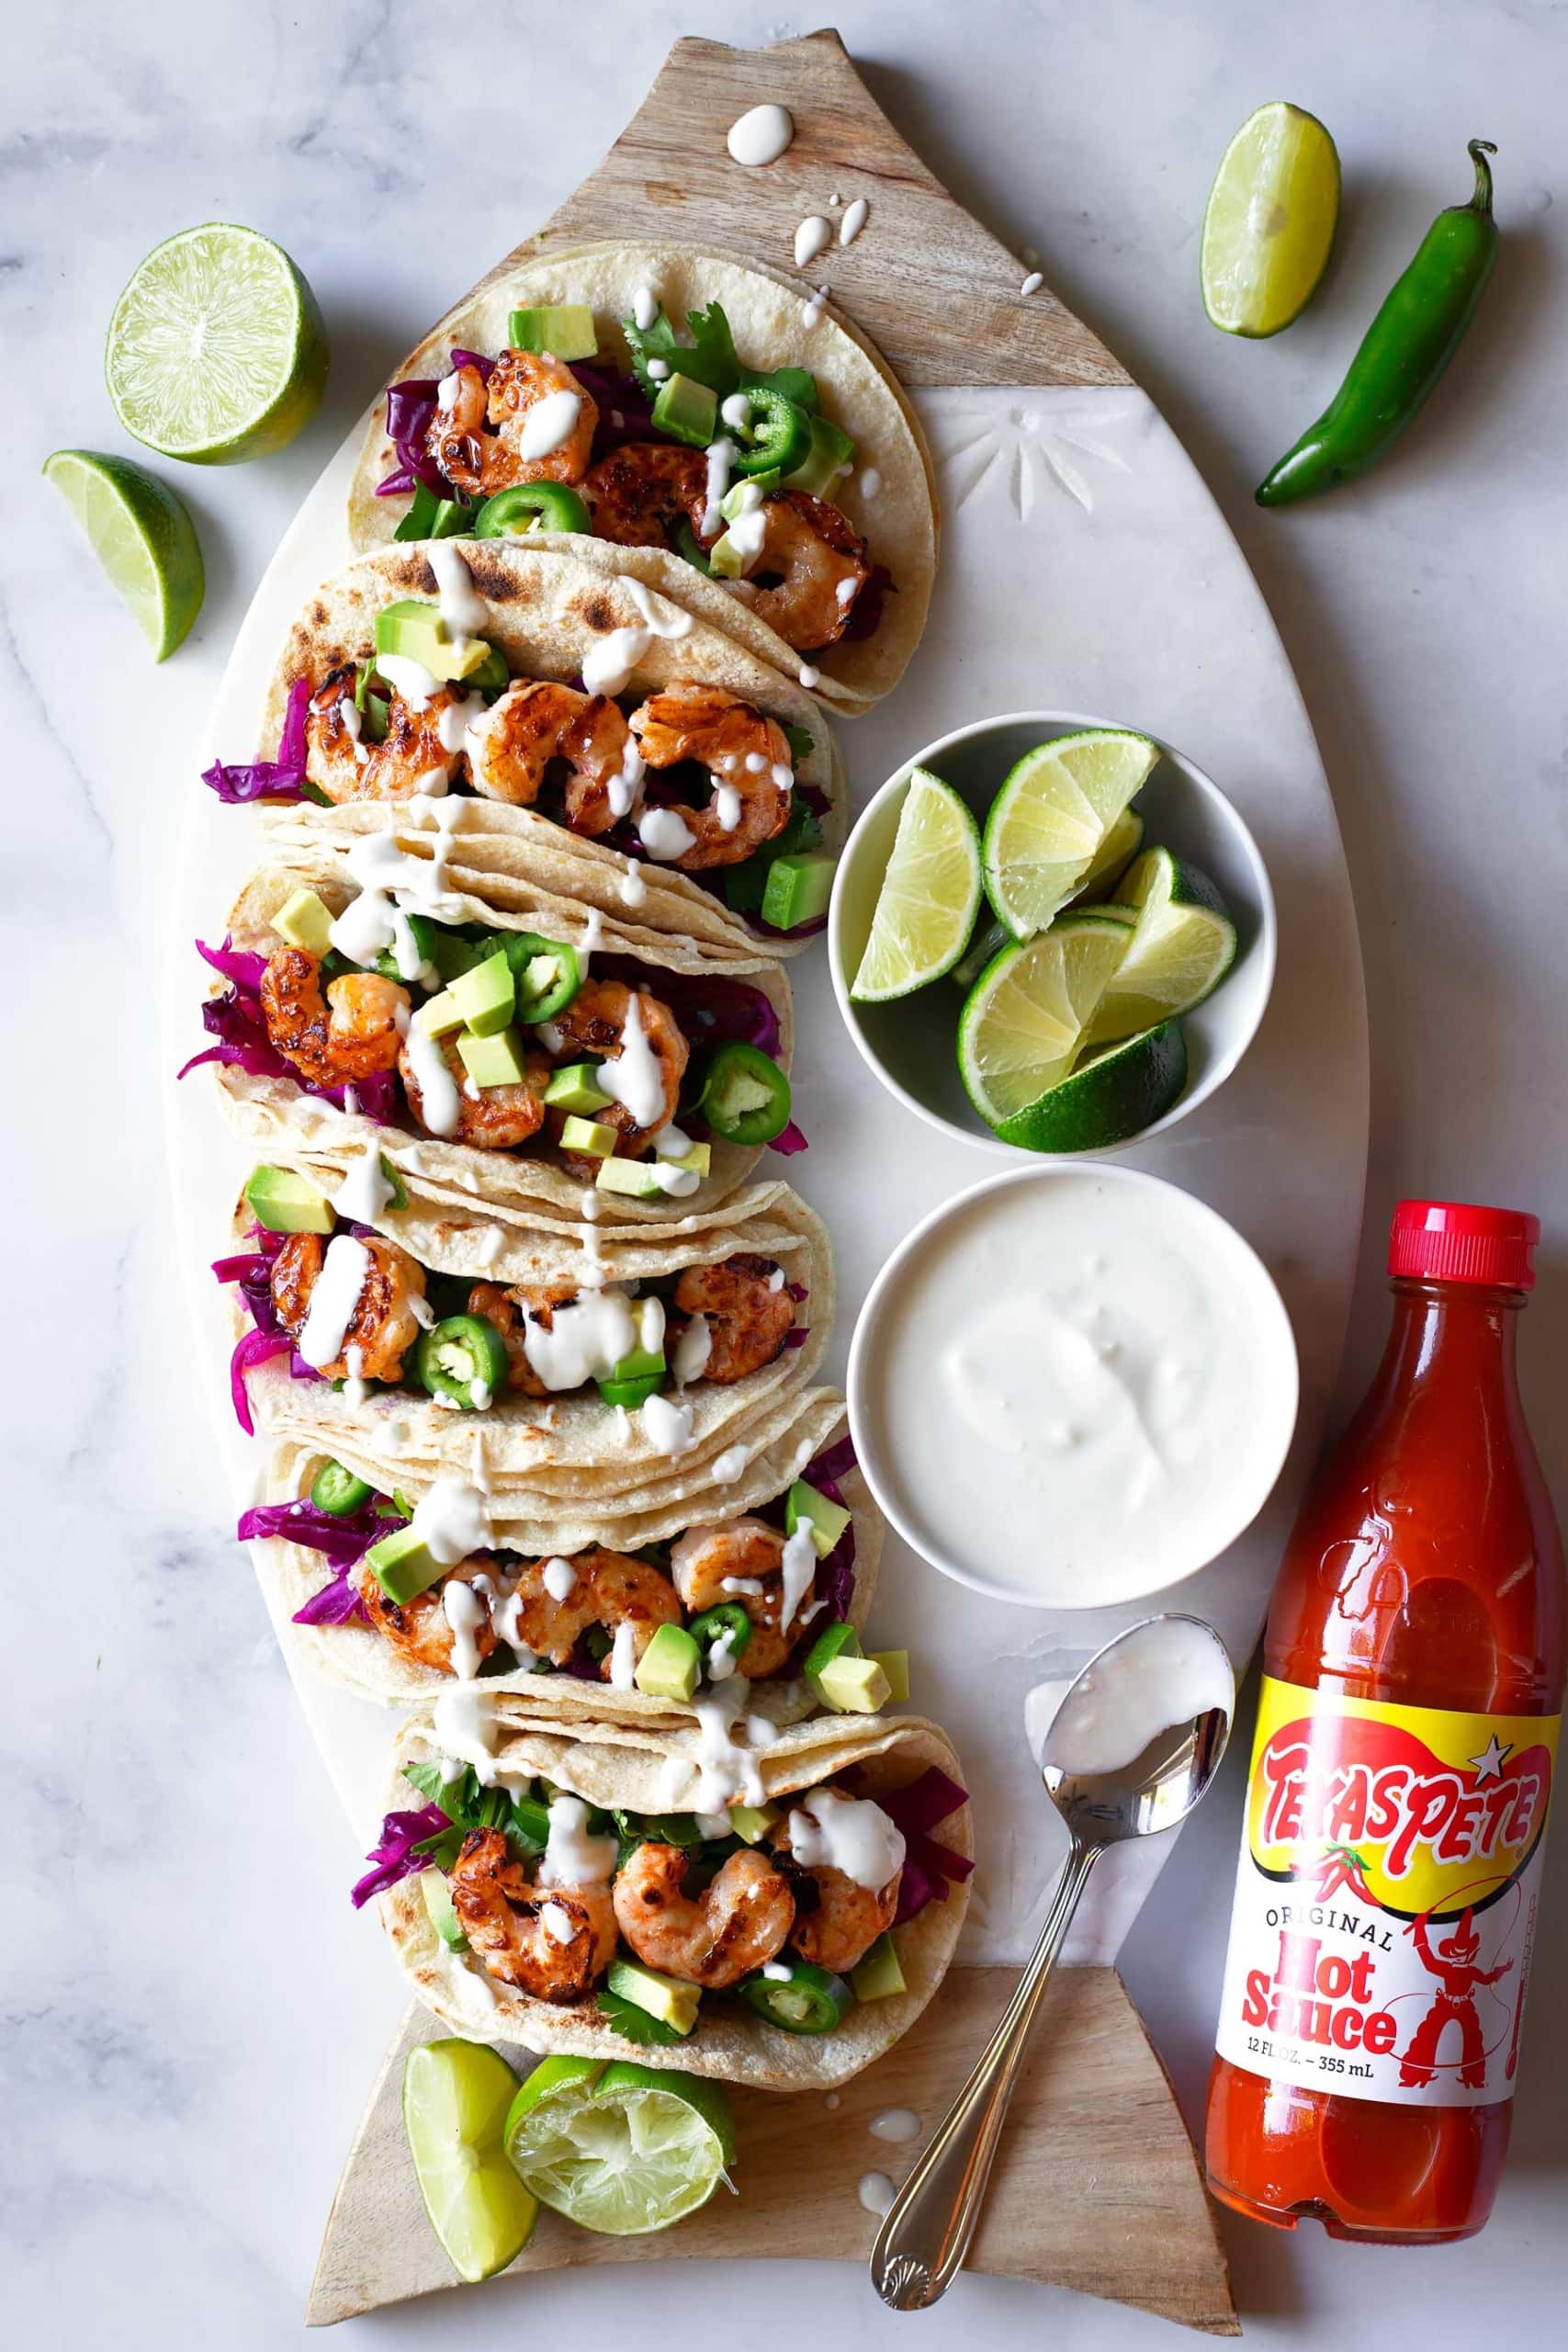 Only 30 minutes to make these easy shrimp tacos! #ad These grilled buffalo shrimp tacos are so flavorful, have the perfect crunch from the simple red cabbage slaw, and are topped with a creamy blue cheese crema! So good and perfect for summer! This recipe is gluten free and can be made low carb and keto by using a keto tortilla! #SauceIntoSummer #SauceLikeYouMeanIt #TexasPete #glutenfree #shrimptacos #shrimprecipes #easydinner #healthydinner #spicyshrimp #glutenfreedinner #weeknightdinner